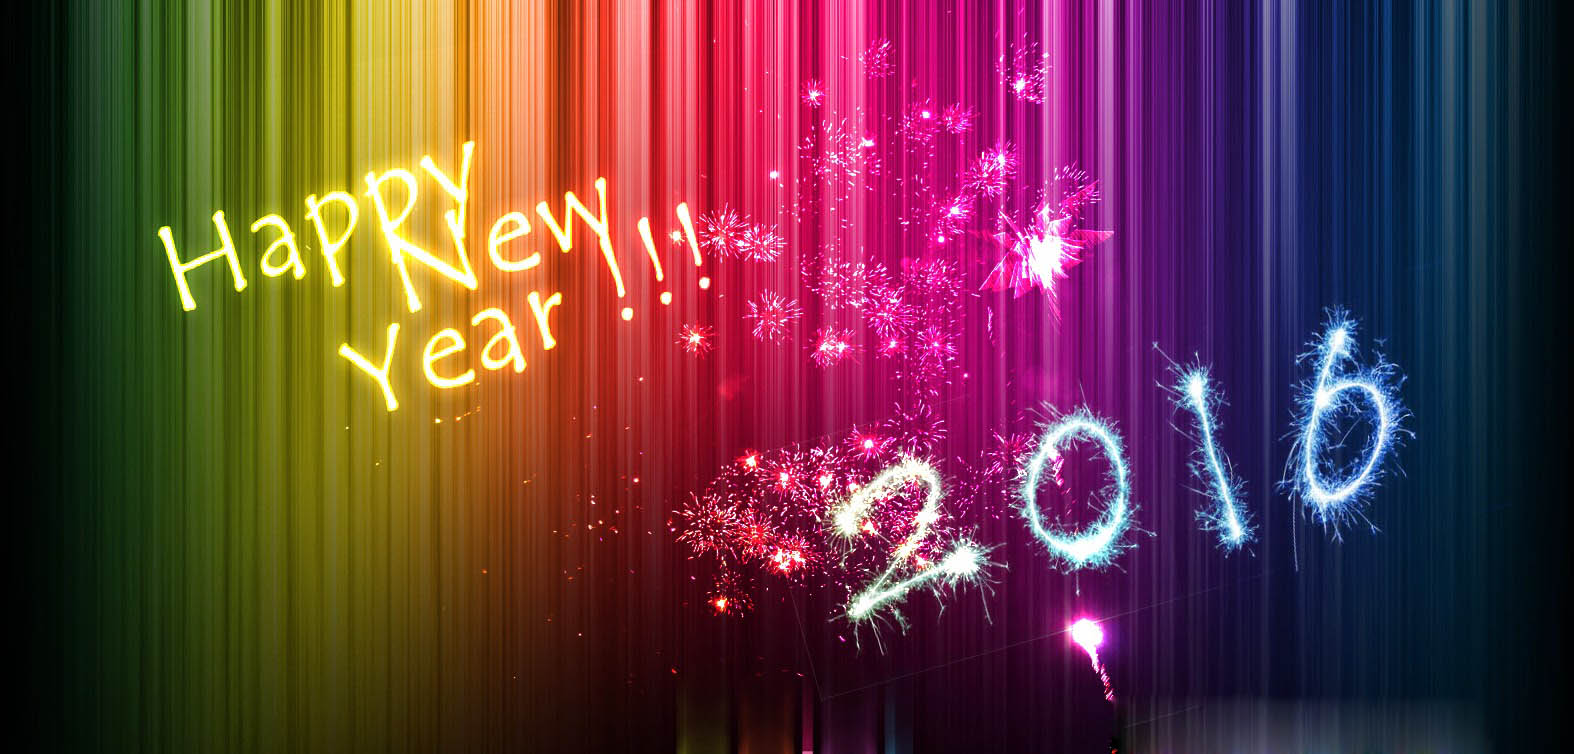 Happy New Year HD Wallpaper New Year Images Happy New Year 2016